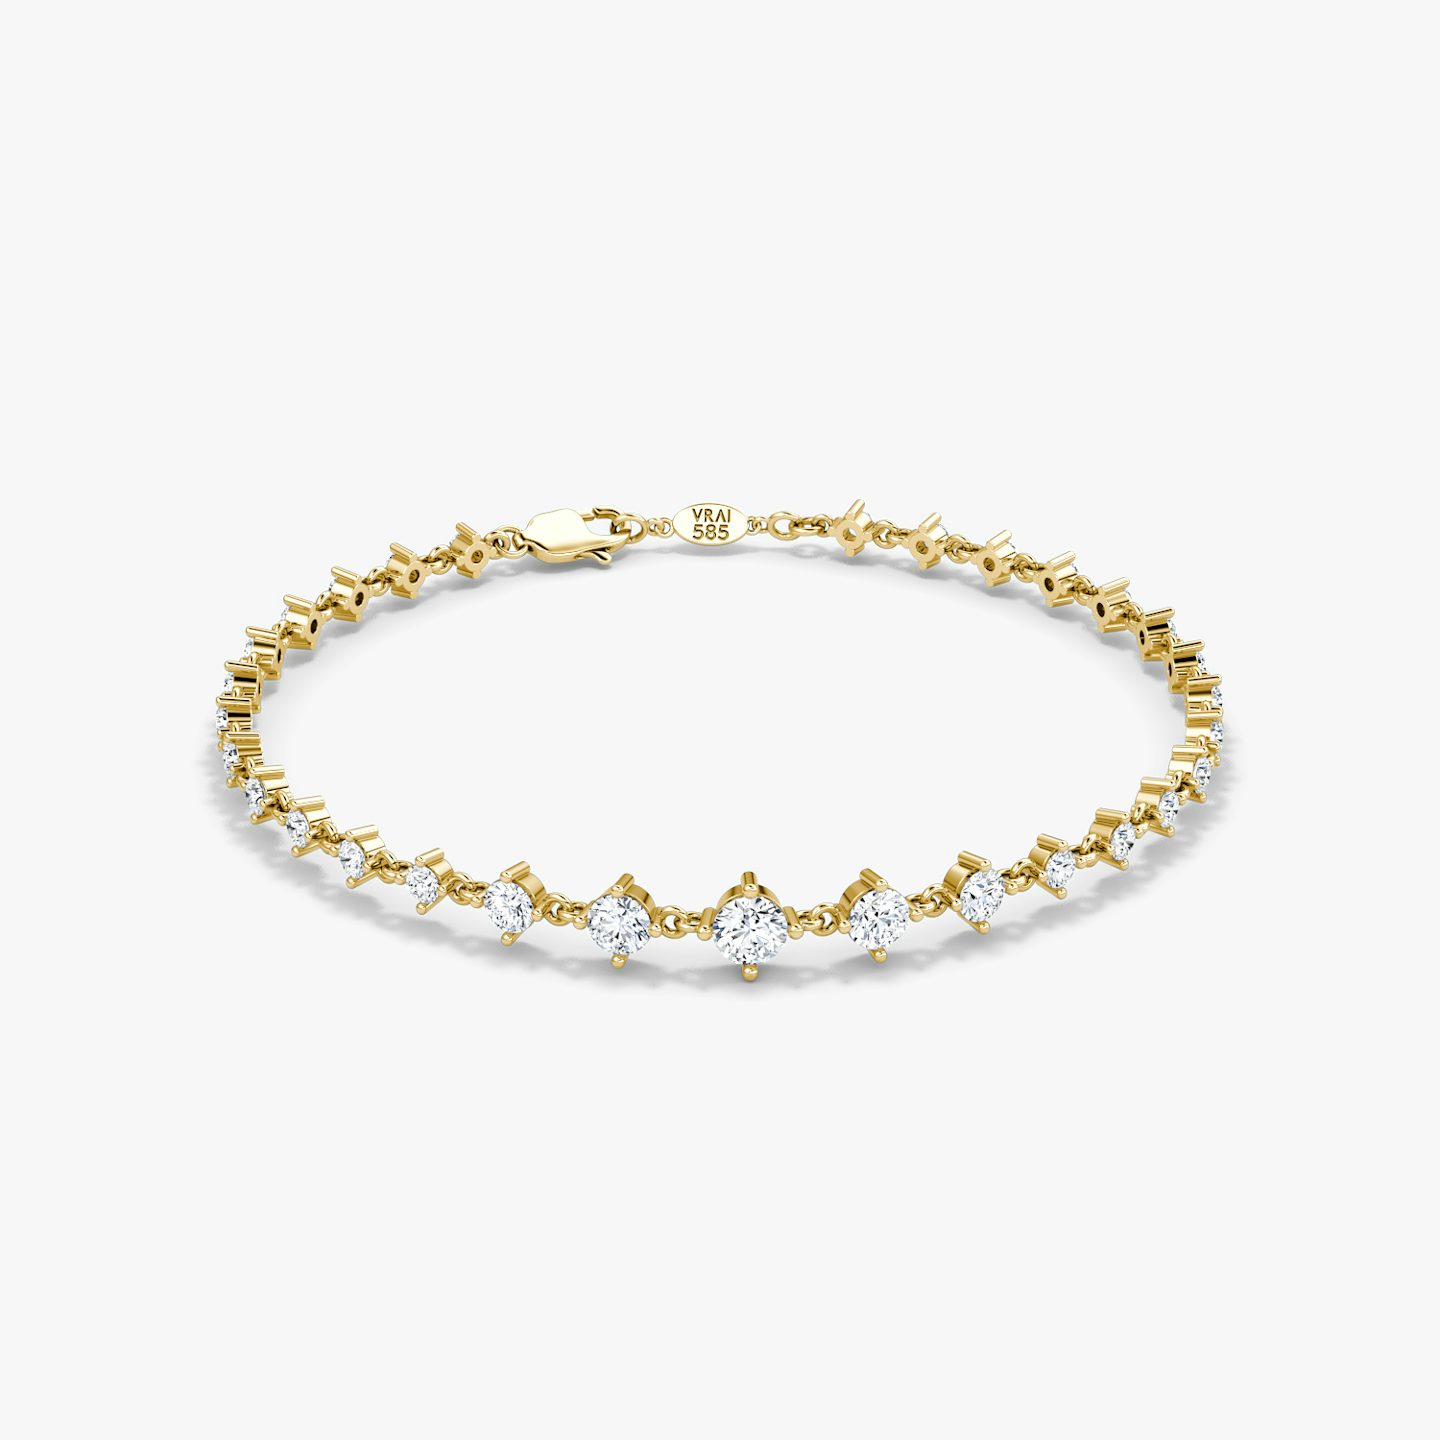 Bracelet Infinity Linked Tennis | round-brilliant | 14k | yellow-gold | caratWeight: 1.7ct | chainLength: 6.5